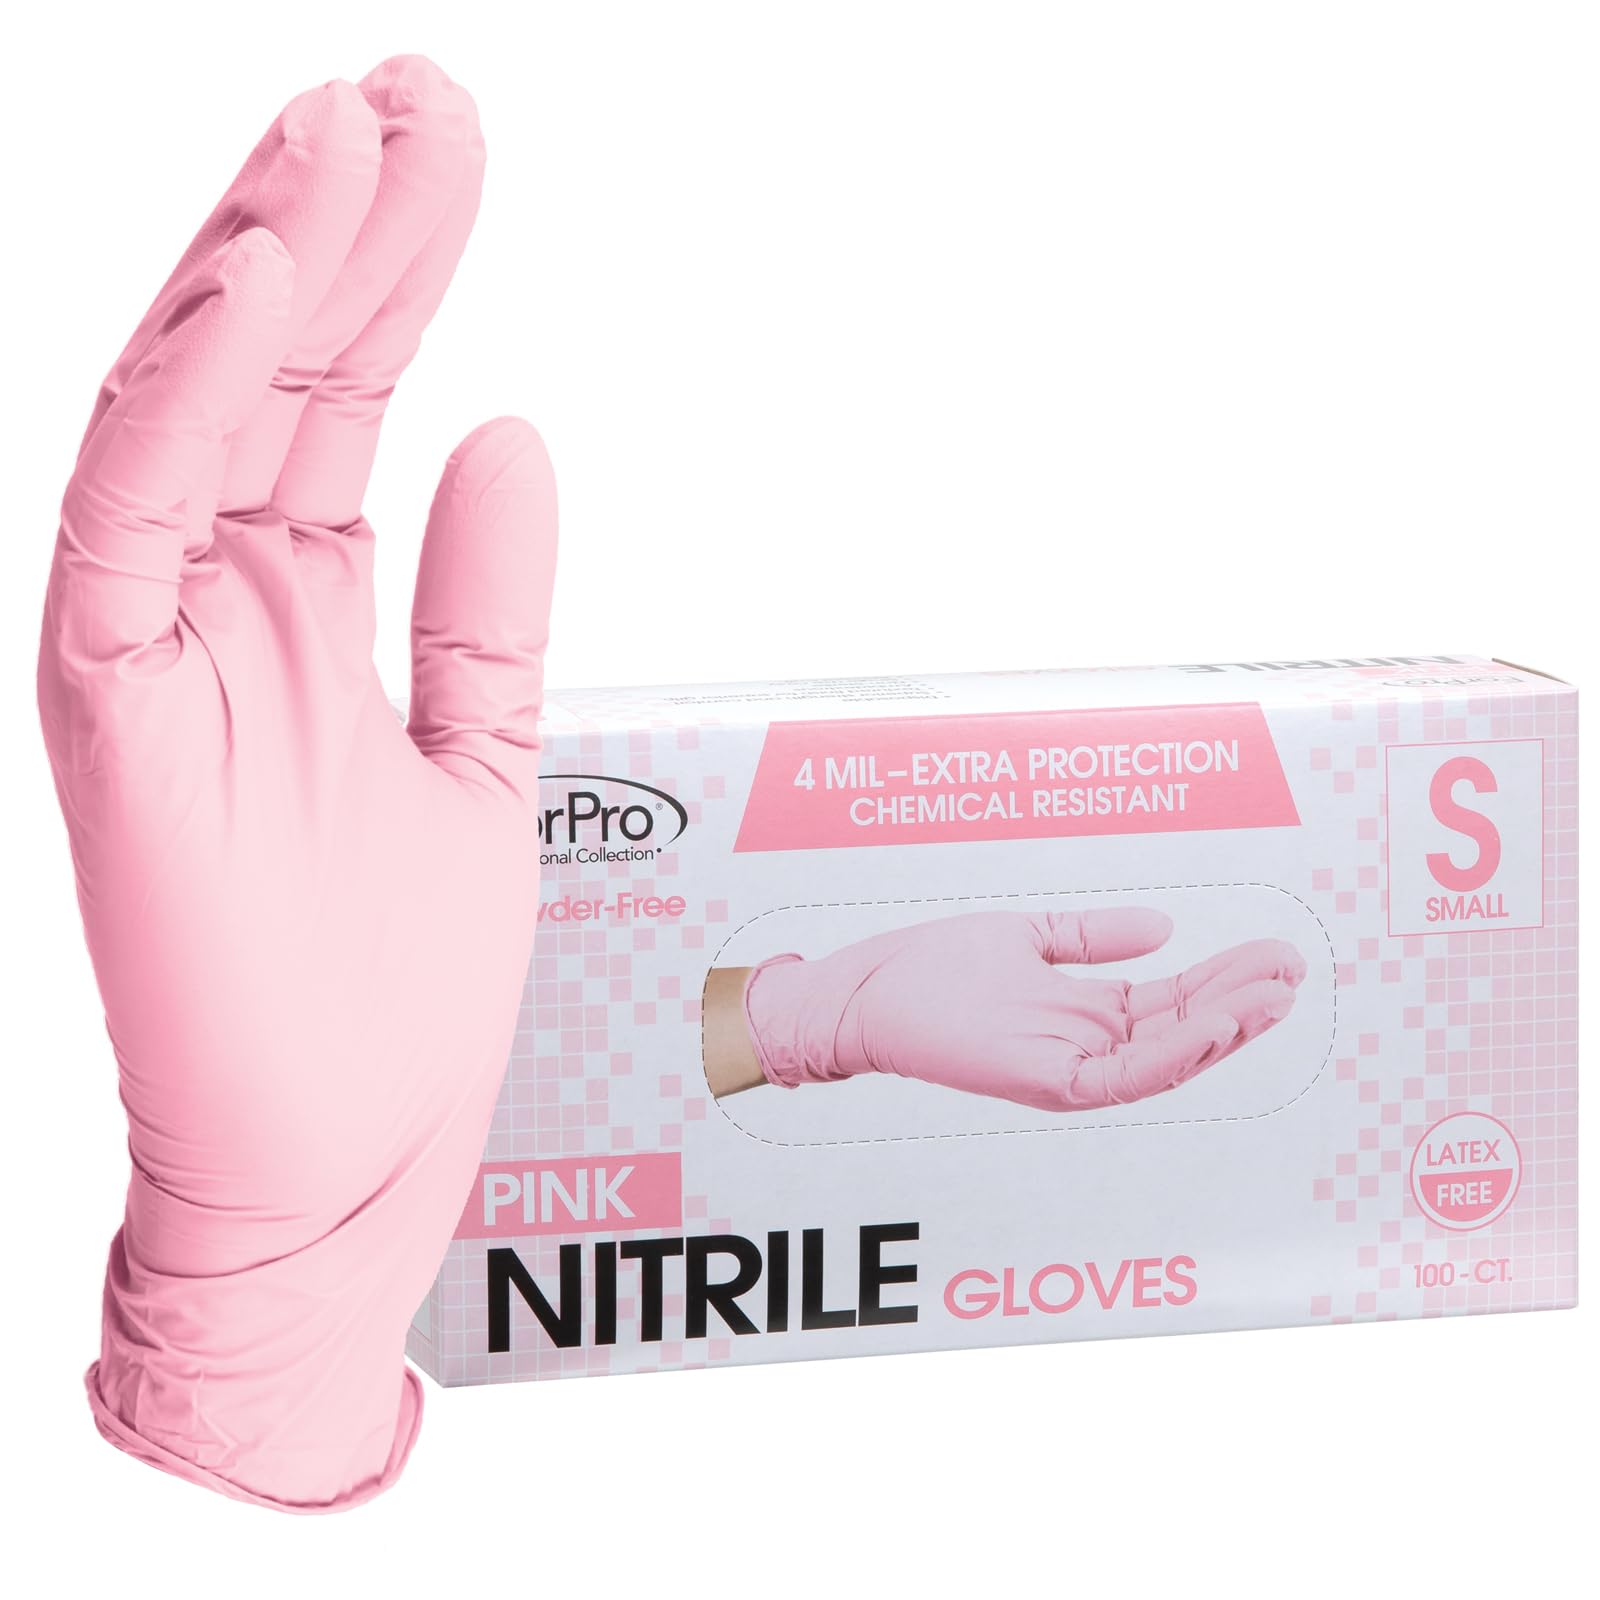 ForPro Disposable Nitrile Gloves, Chemical Resistant, Powder-Free, Latex-Free, Non-Sterile, Food Safe, 4 Mil, Pink, Small, 100-Count